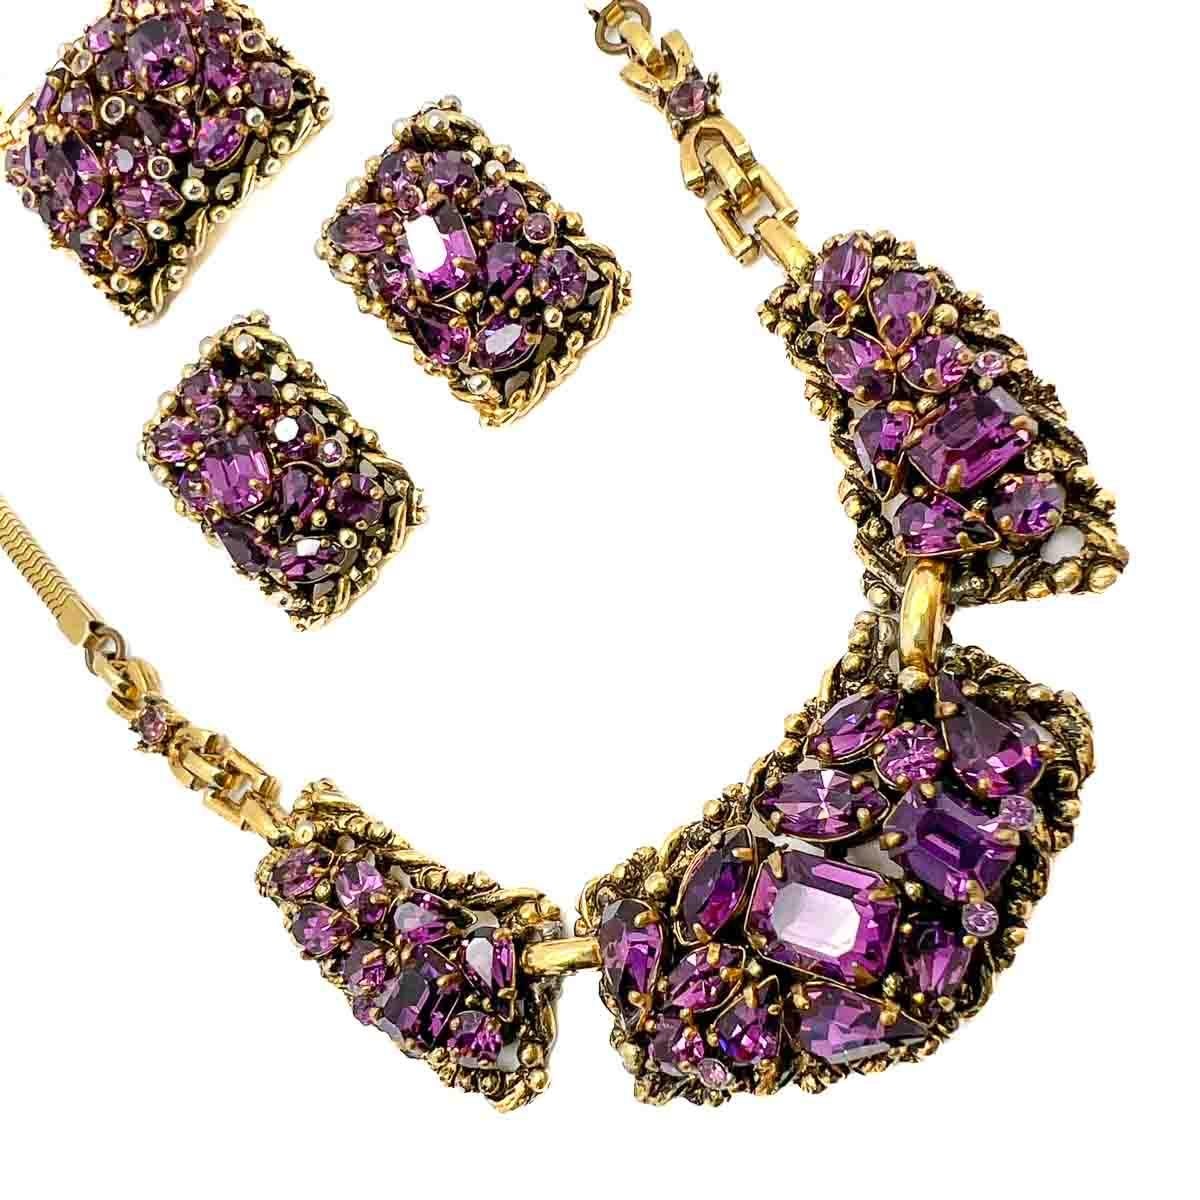 A Vintage Barclay Amethyst Necklace, brooch, and earring set. An exquisite creation that oozes opulence in a very wearable way. The perfect glam accessory.
Founded in 1947, Barclay Jewellery was known for exquisite detail and excellent quality